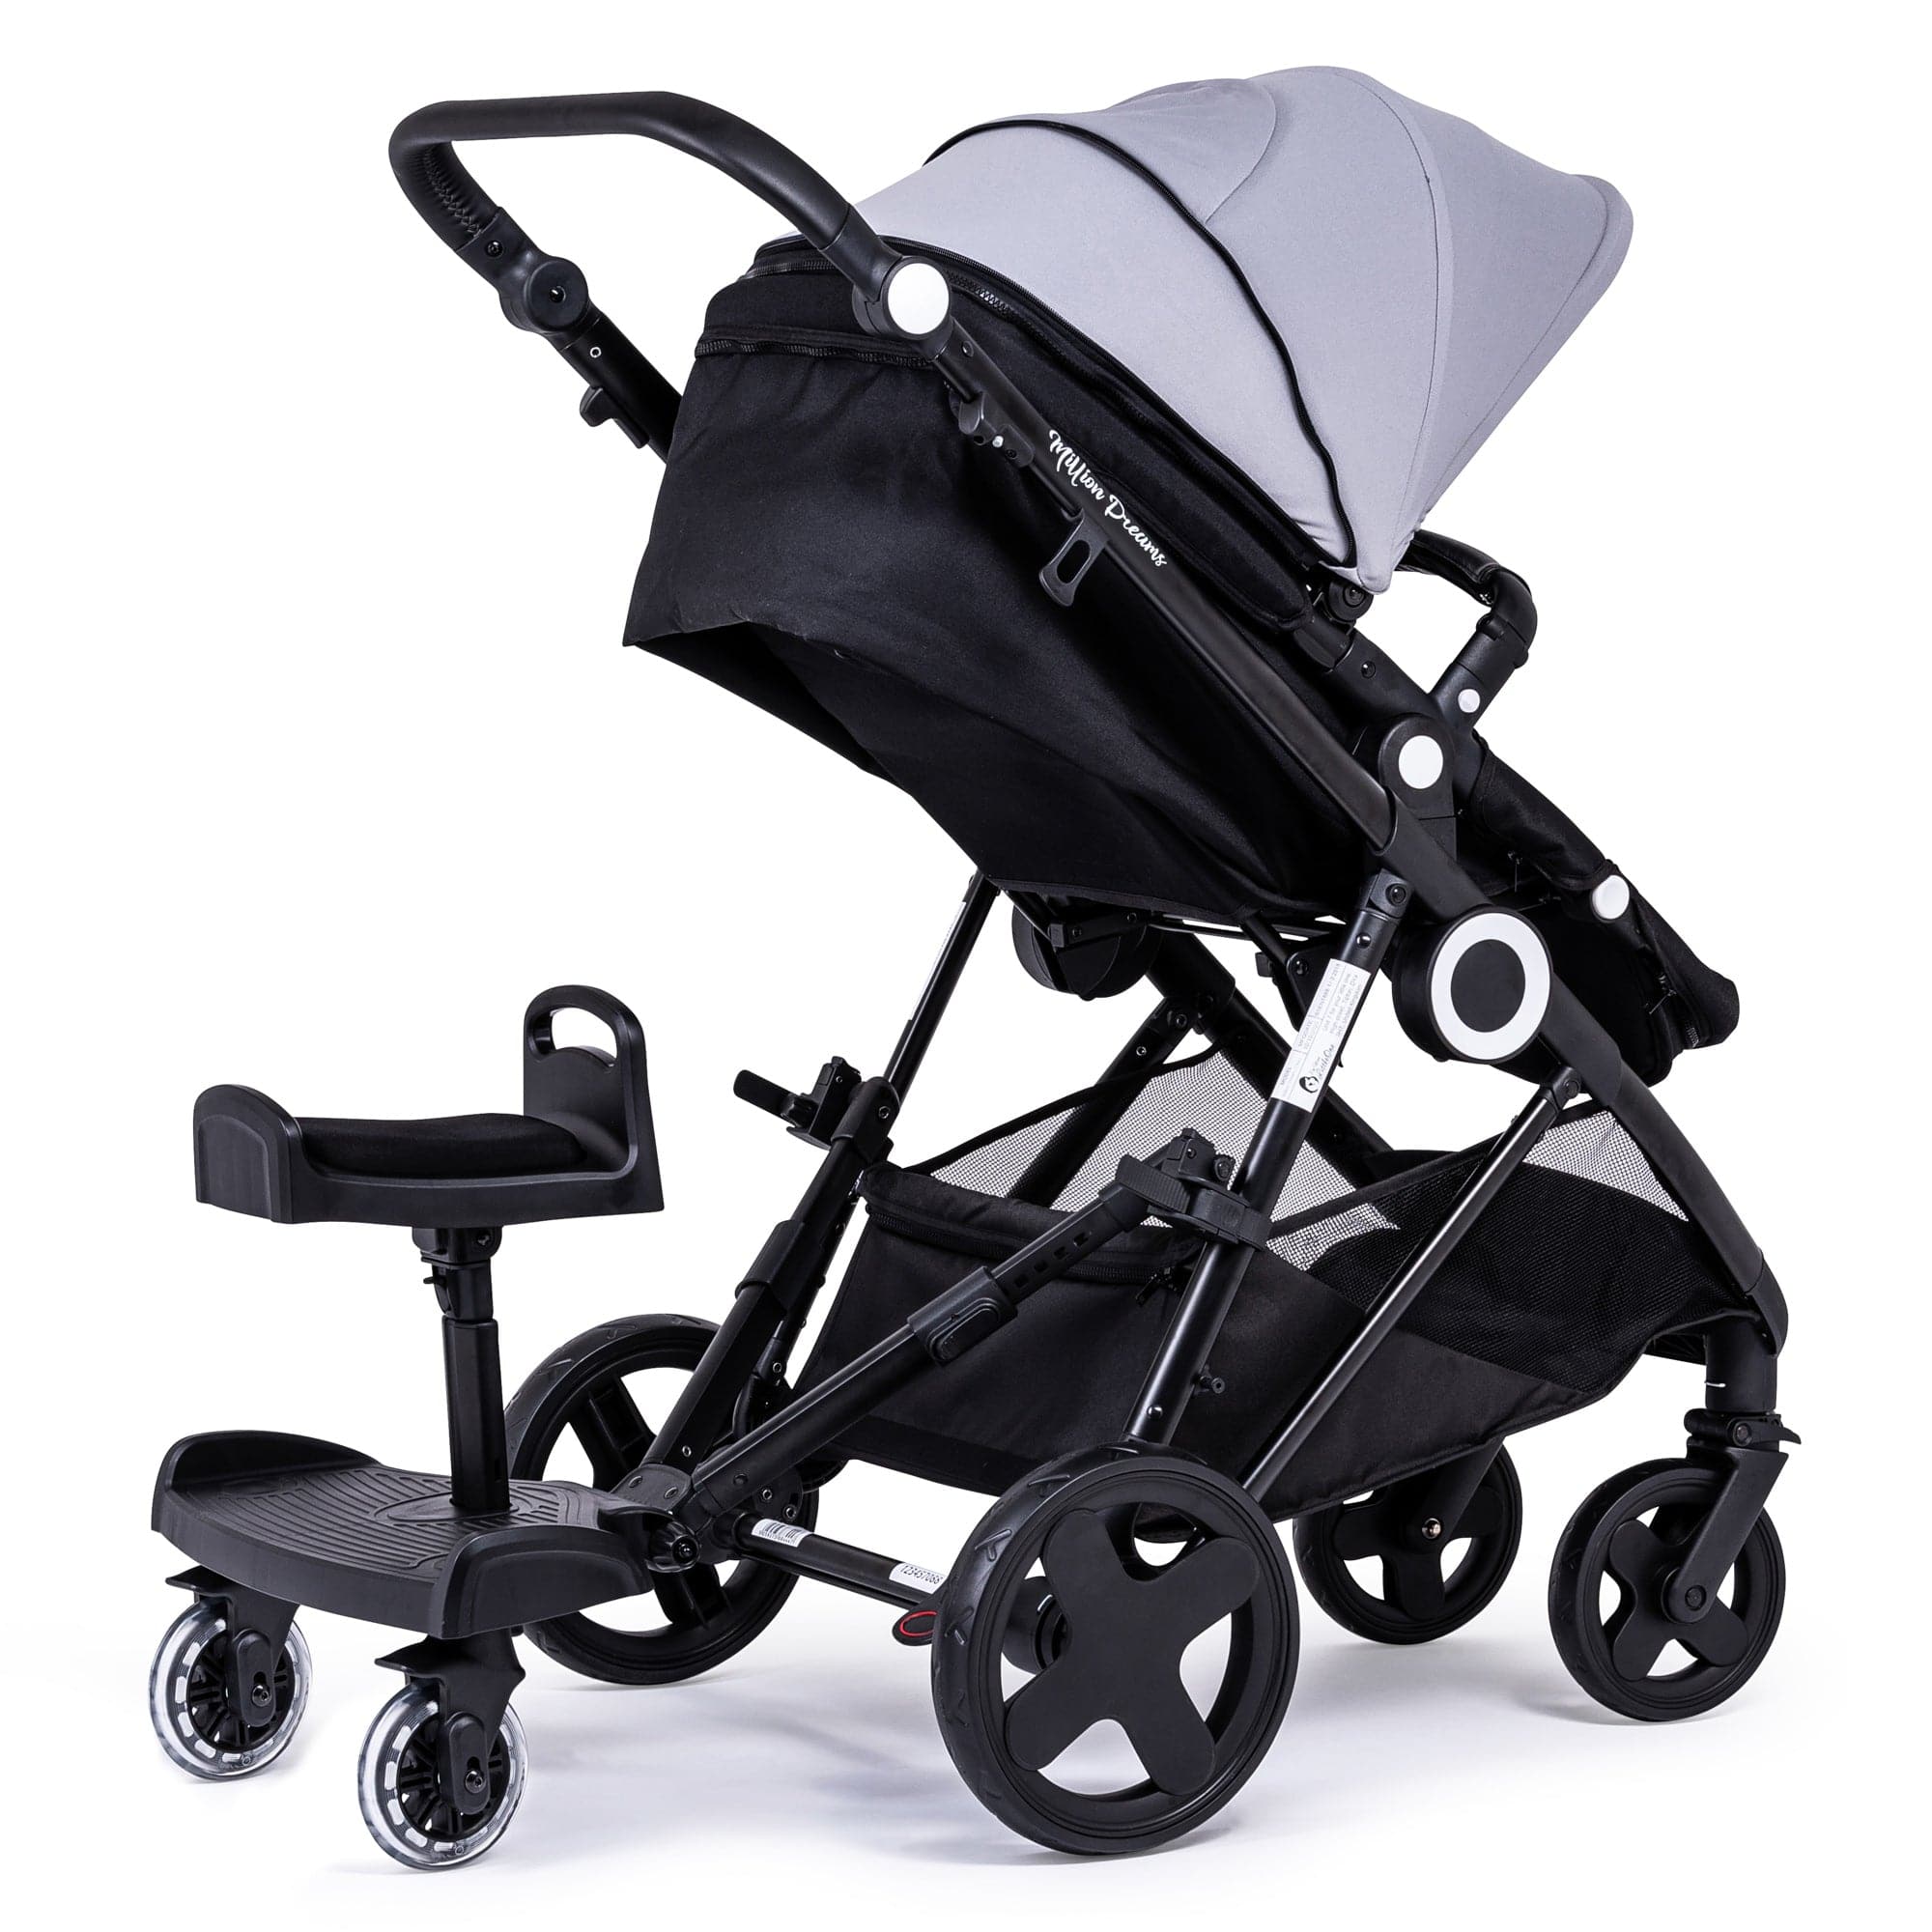 Ride On Board with Seat Compatible with Easywalker - For Your Little One